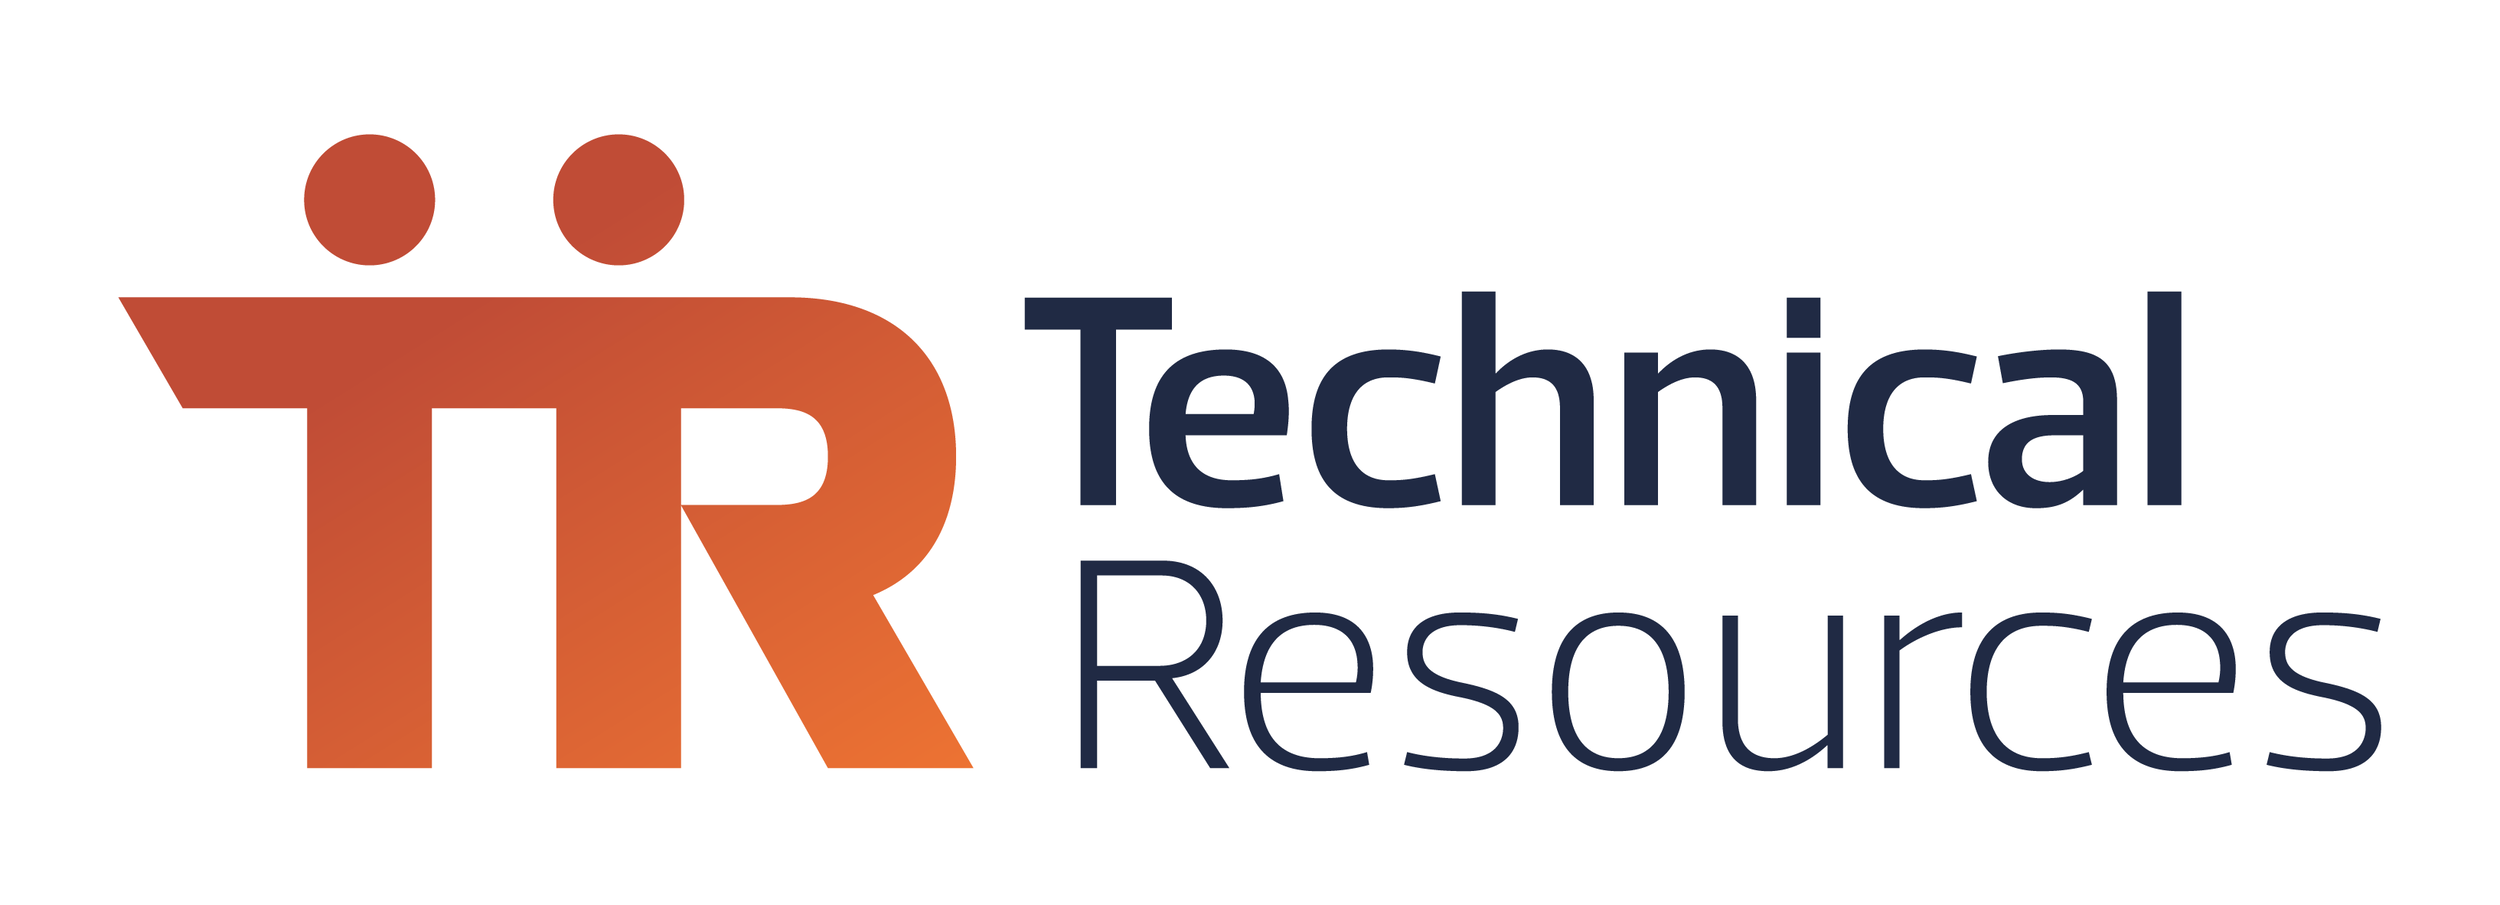 Technical Resources Logo-01.png